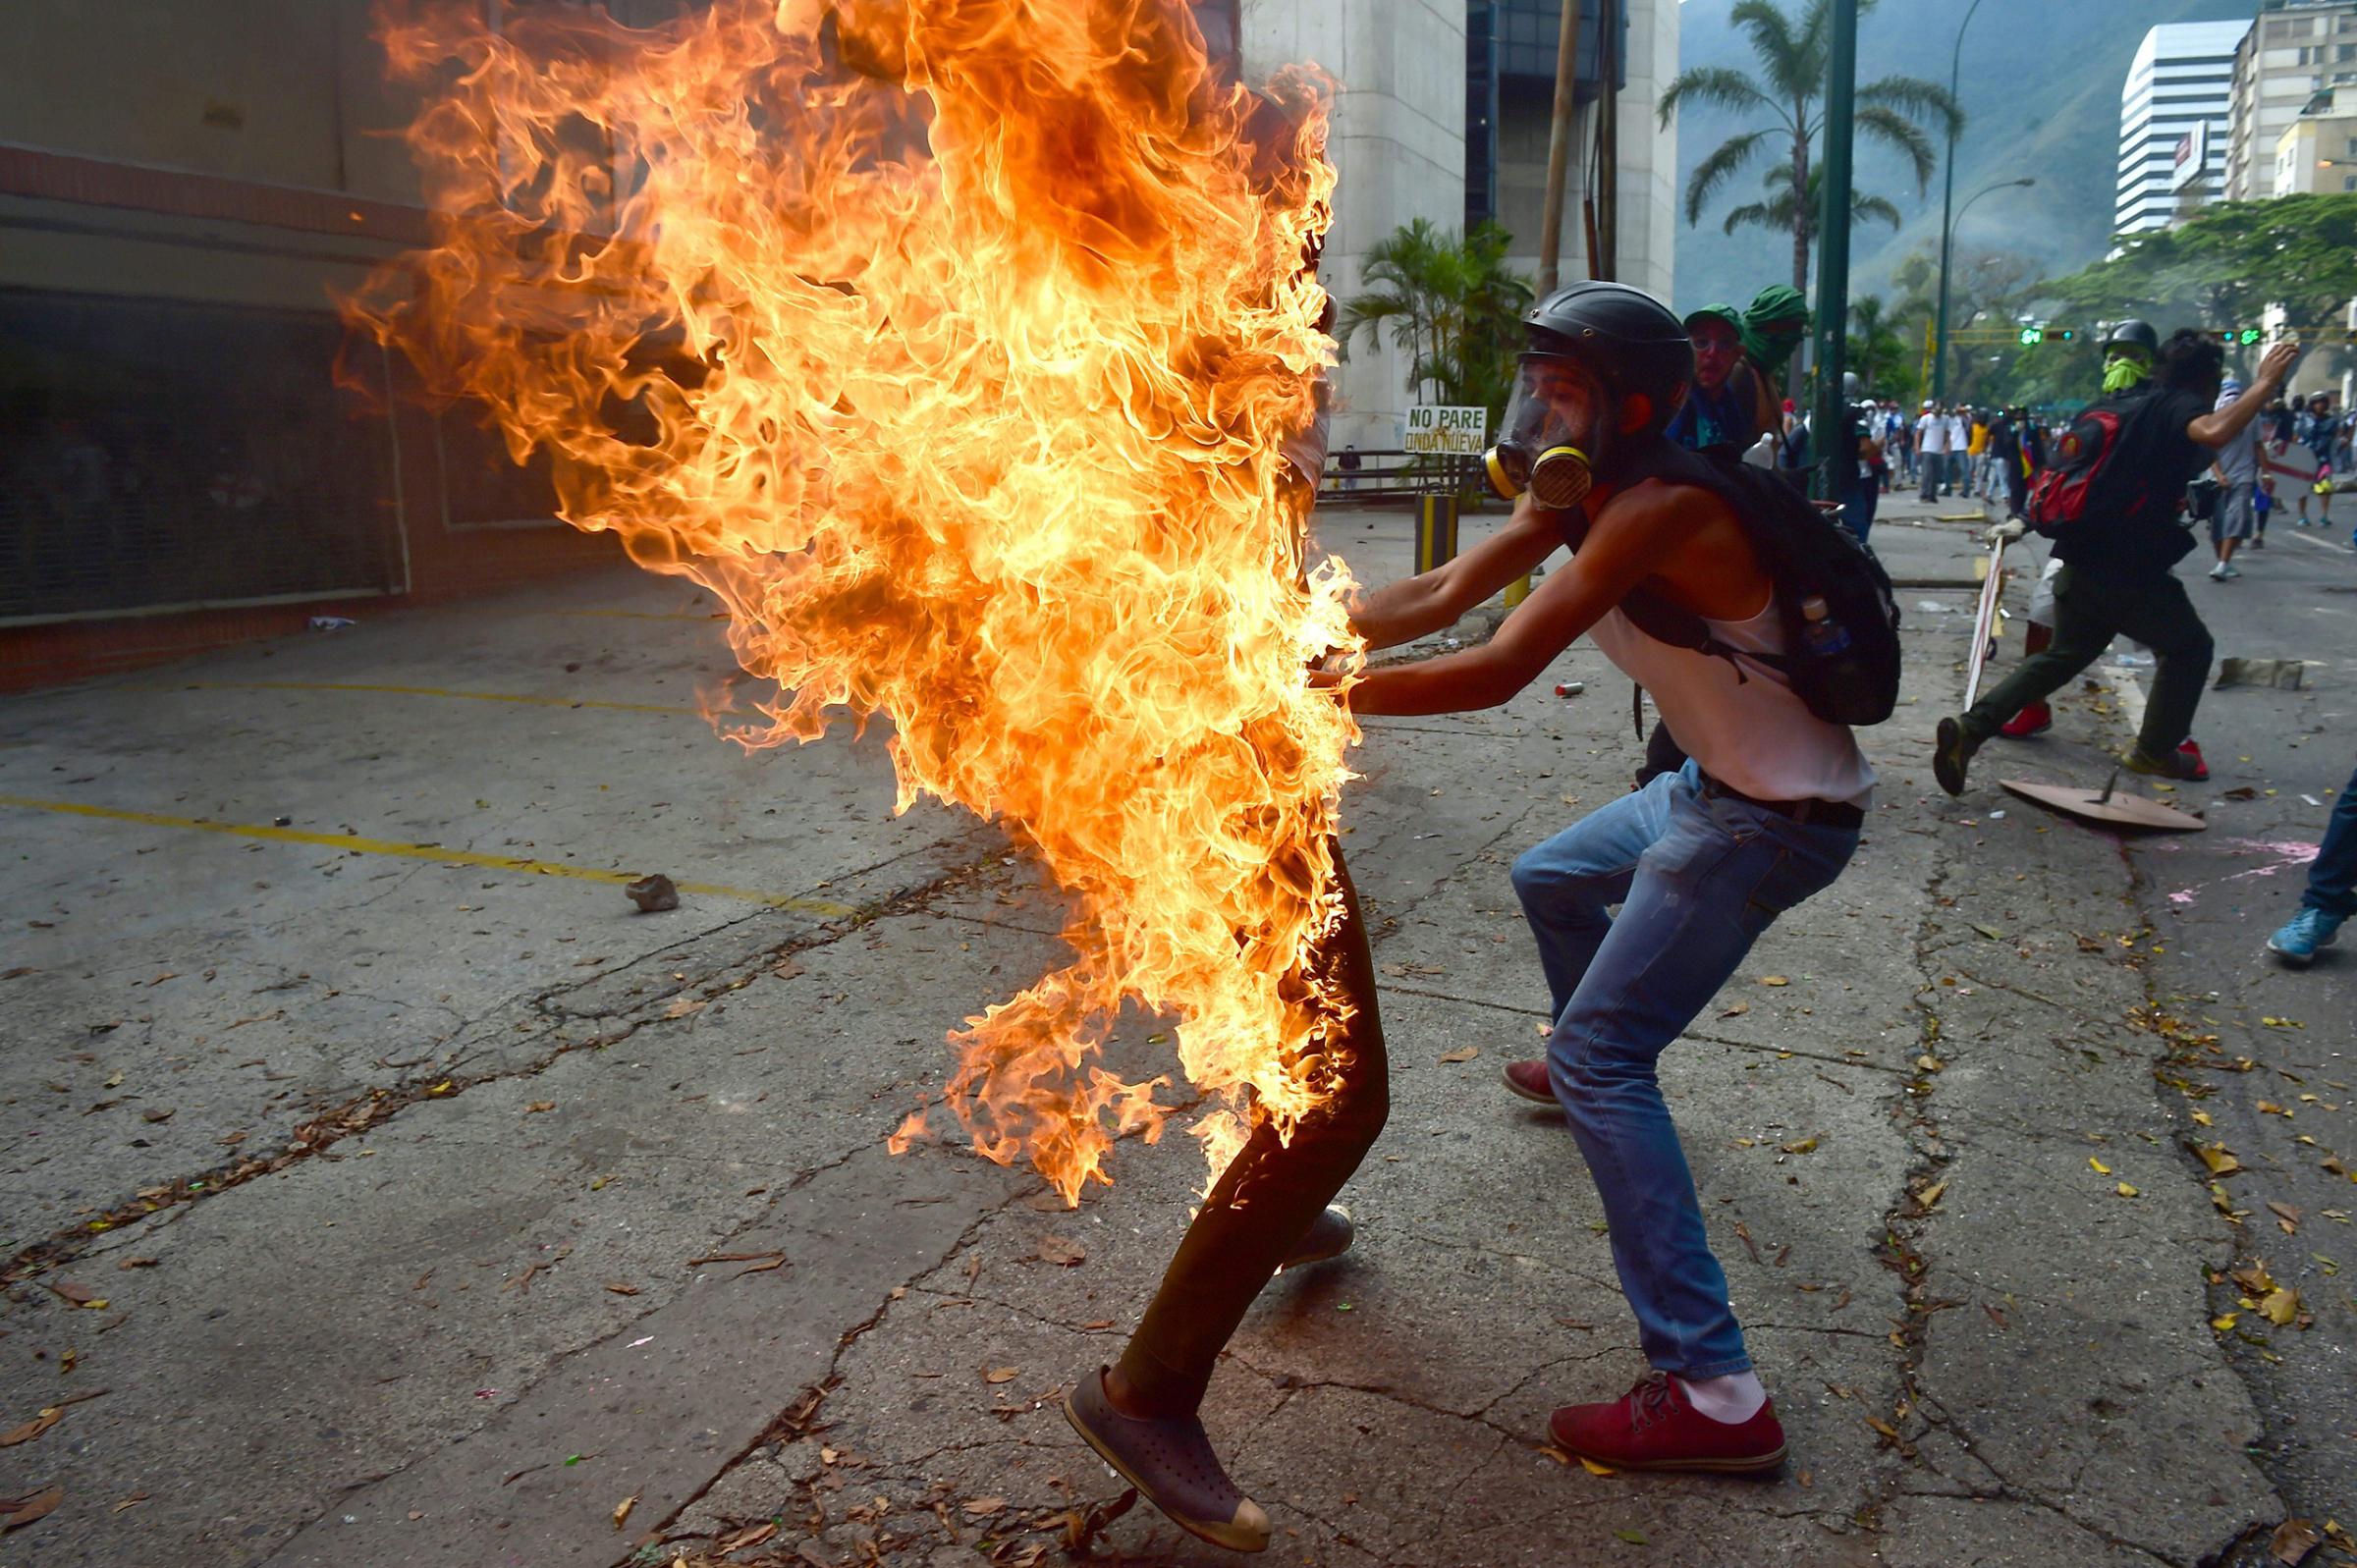 A demonstrator lifts the shirt off of a man who was accidentally set ablaze in Caracas on May 3, 2017.